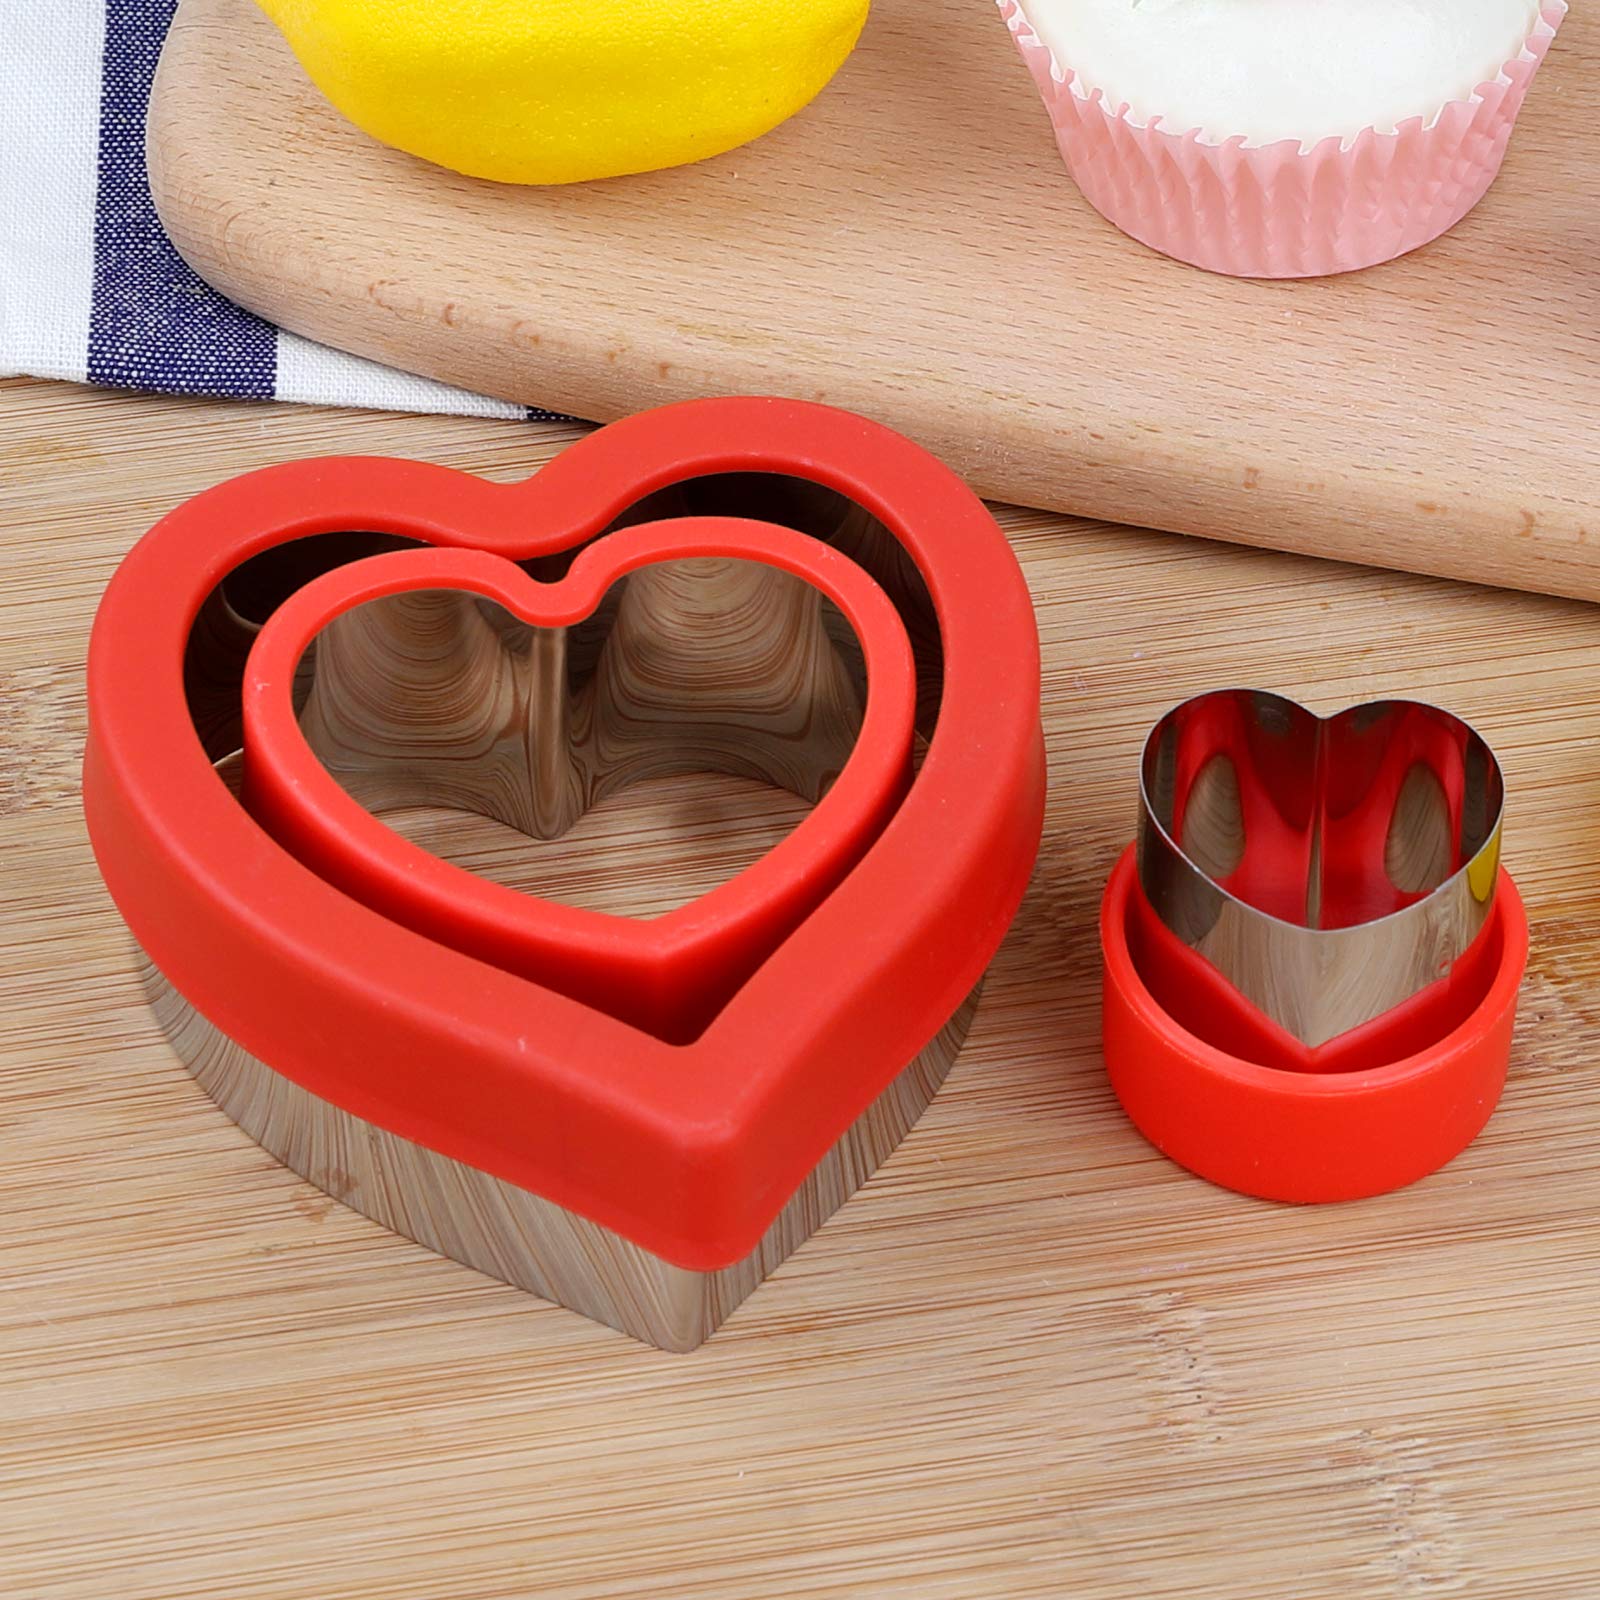 Love Heart Shape Cookie Cutters, Baking Vegetable Shape Cutters, Mini & Medium & Large Cookie Cutters,The Valentine’s Day Cookie Cutters with Red Color Biscuit Molds Fondant Cake Cookie Cutter Set